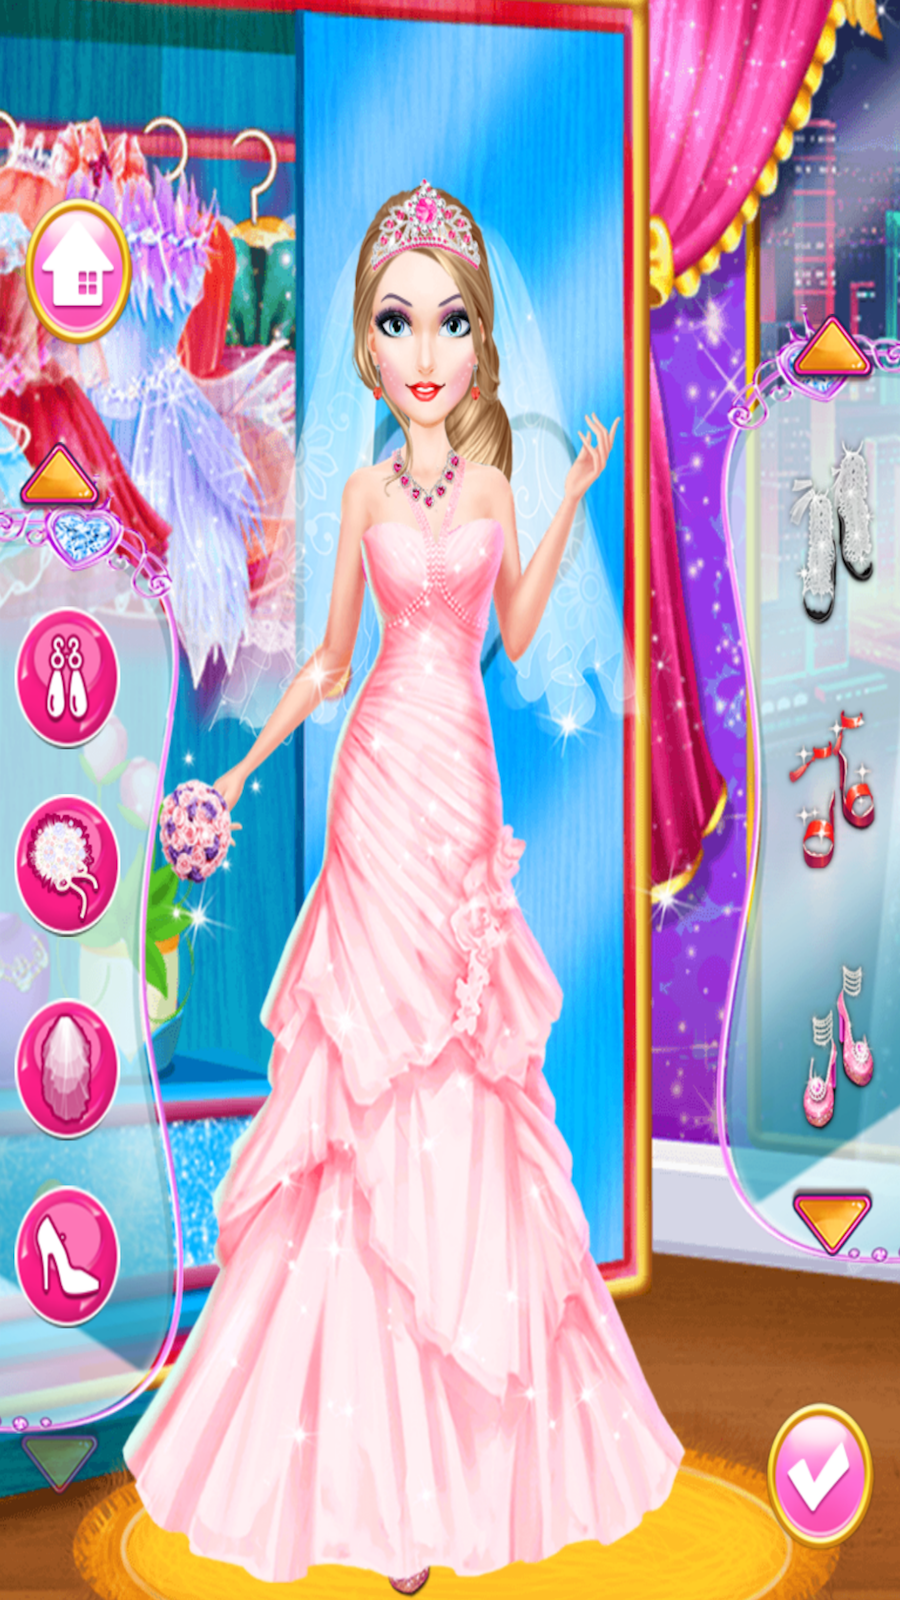 Wedding Princess Salon Dress Up Game For Kids + Ready For Publish